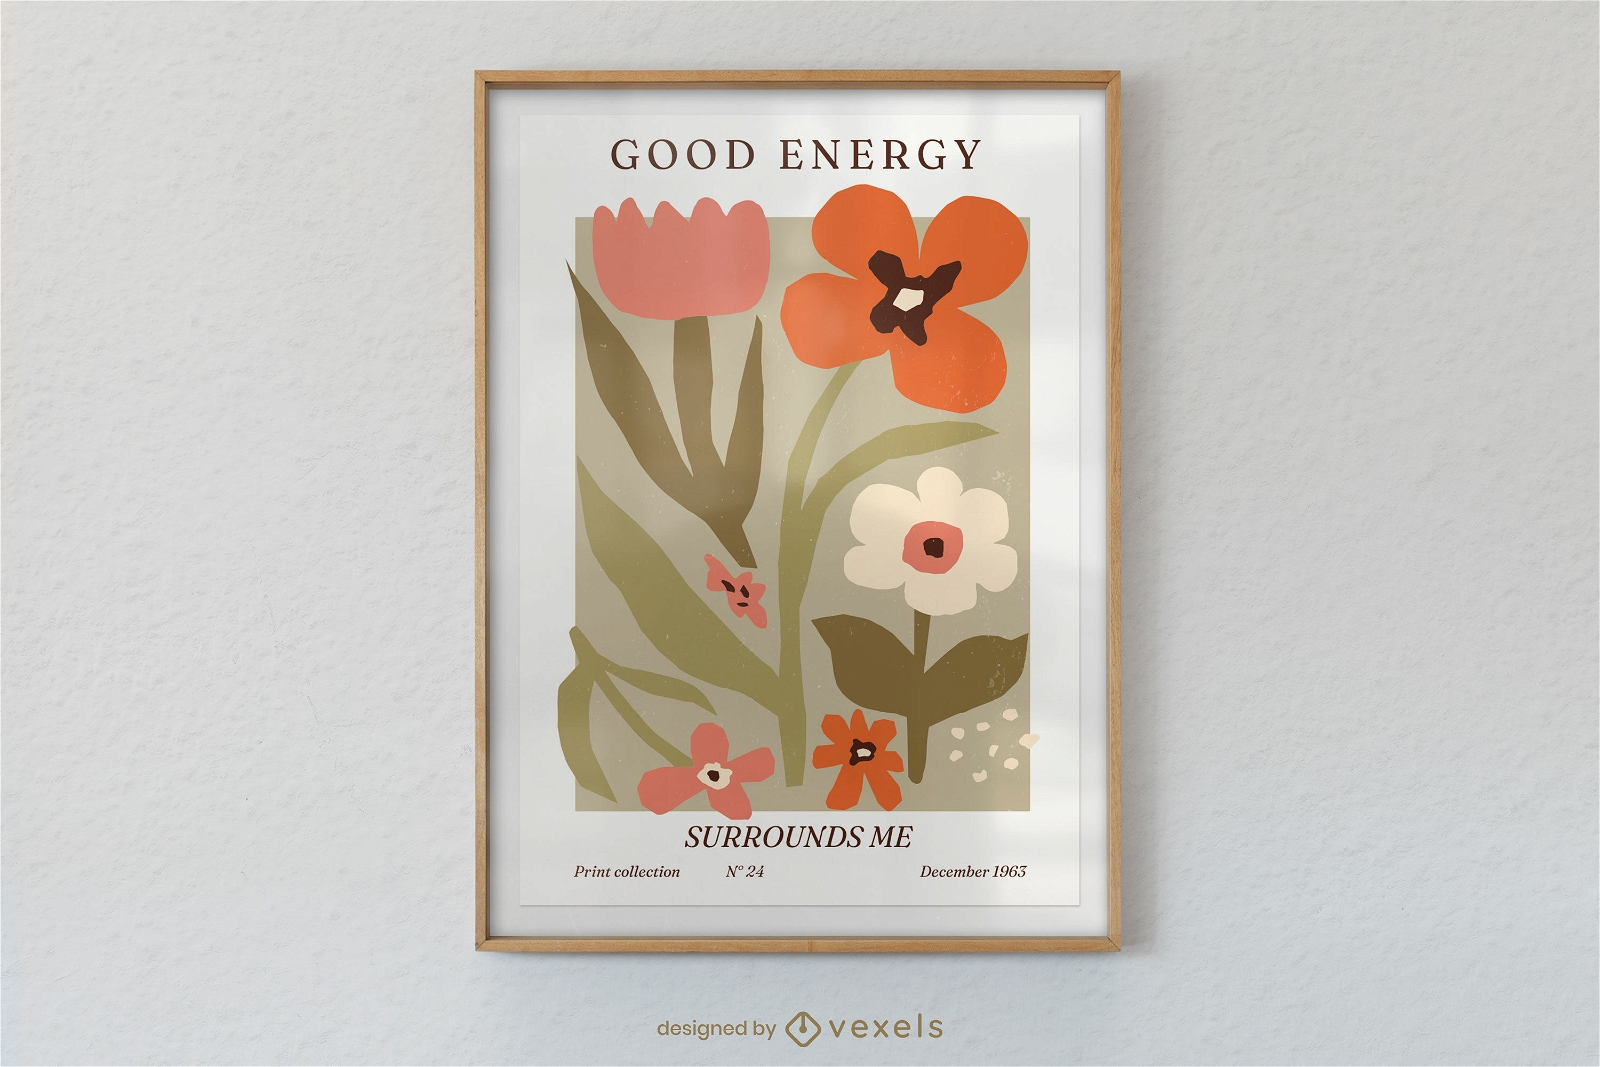 Abstract flower poster design